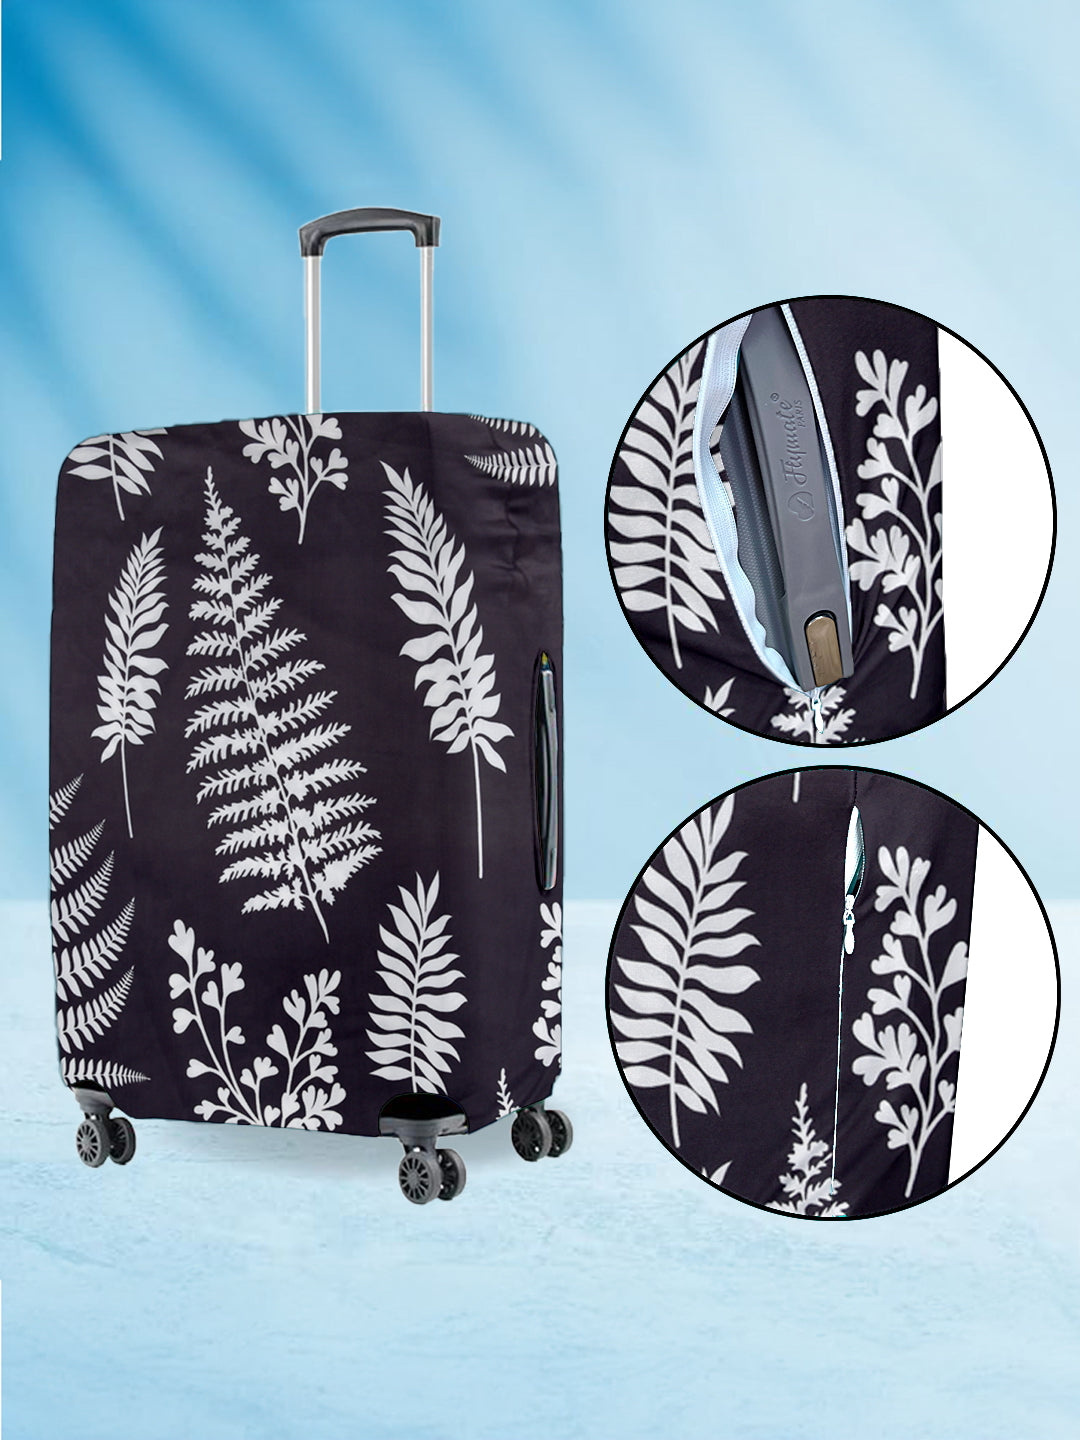 Stretchable Printed Protective Luggage Bag Cover Medium- Black & White